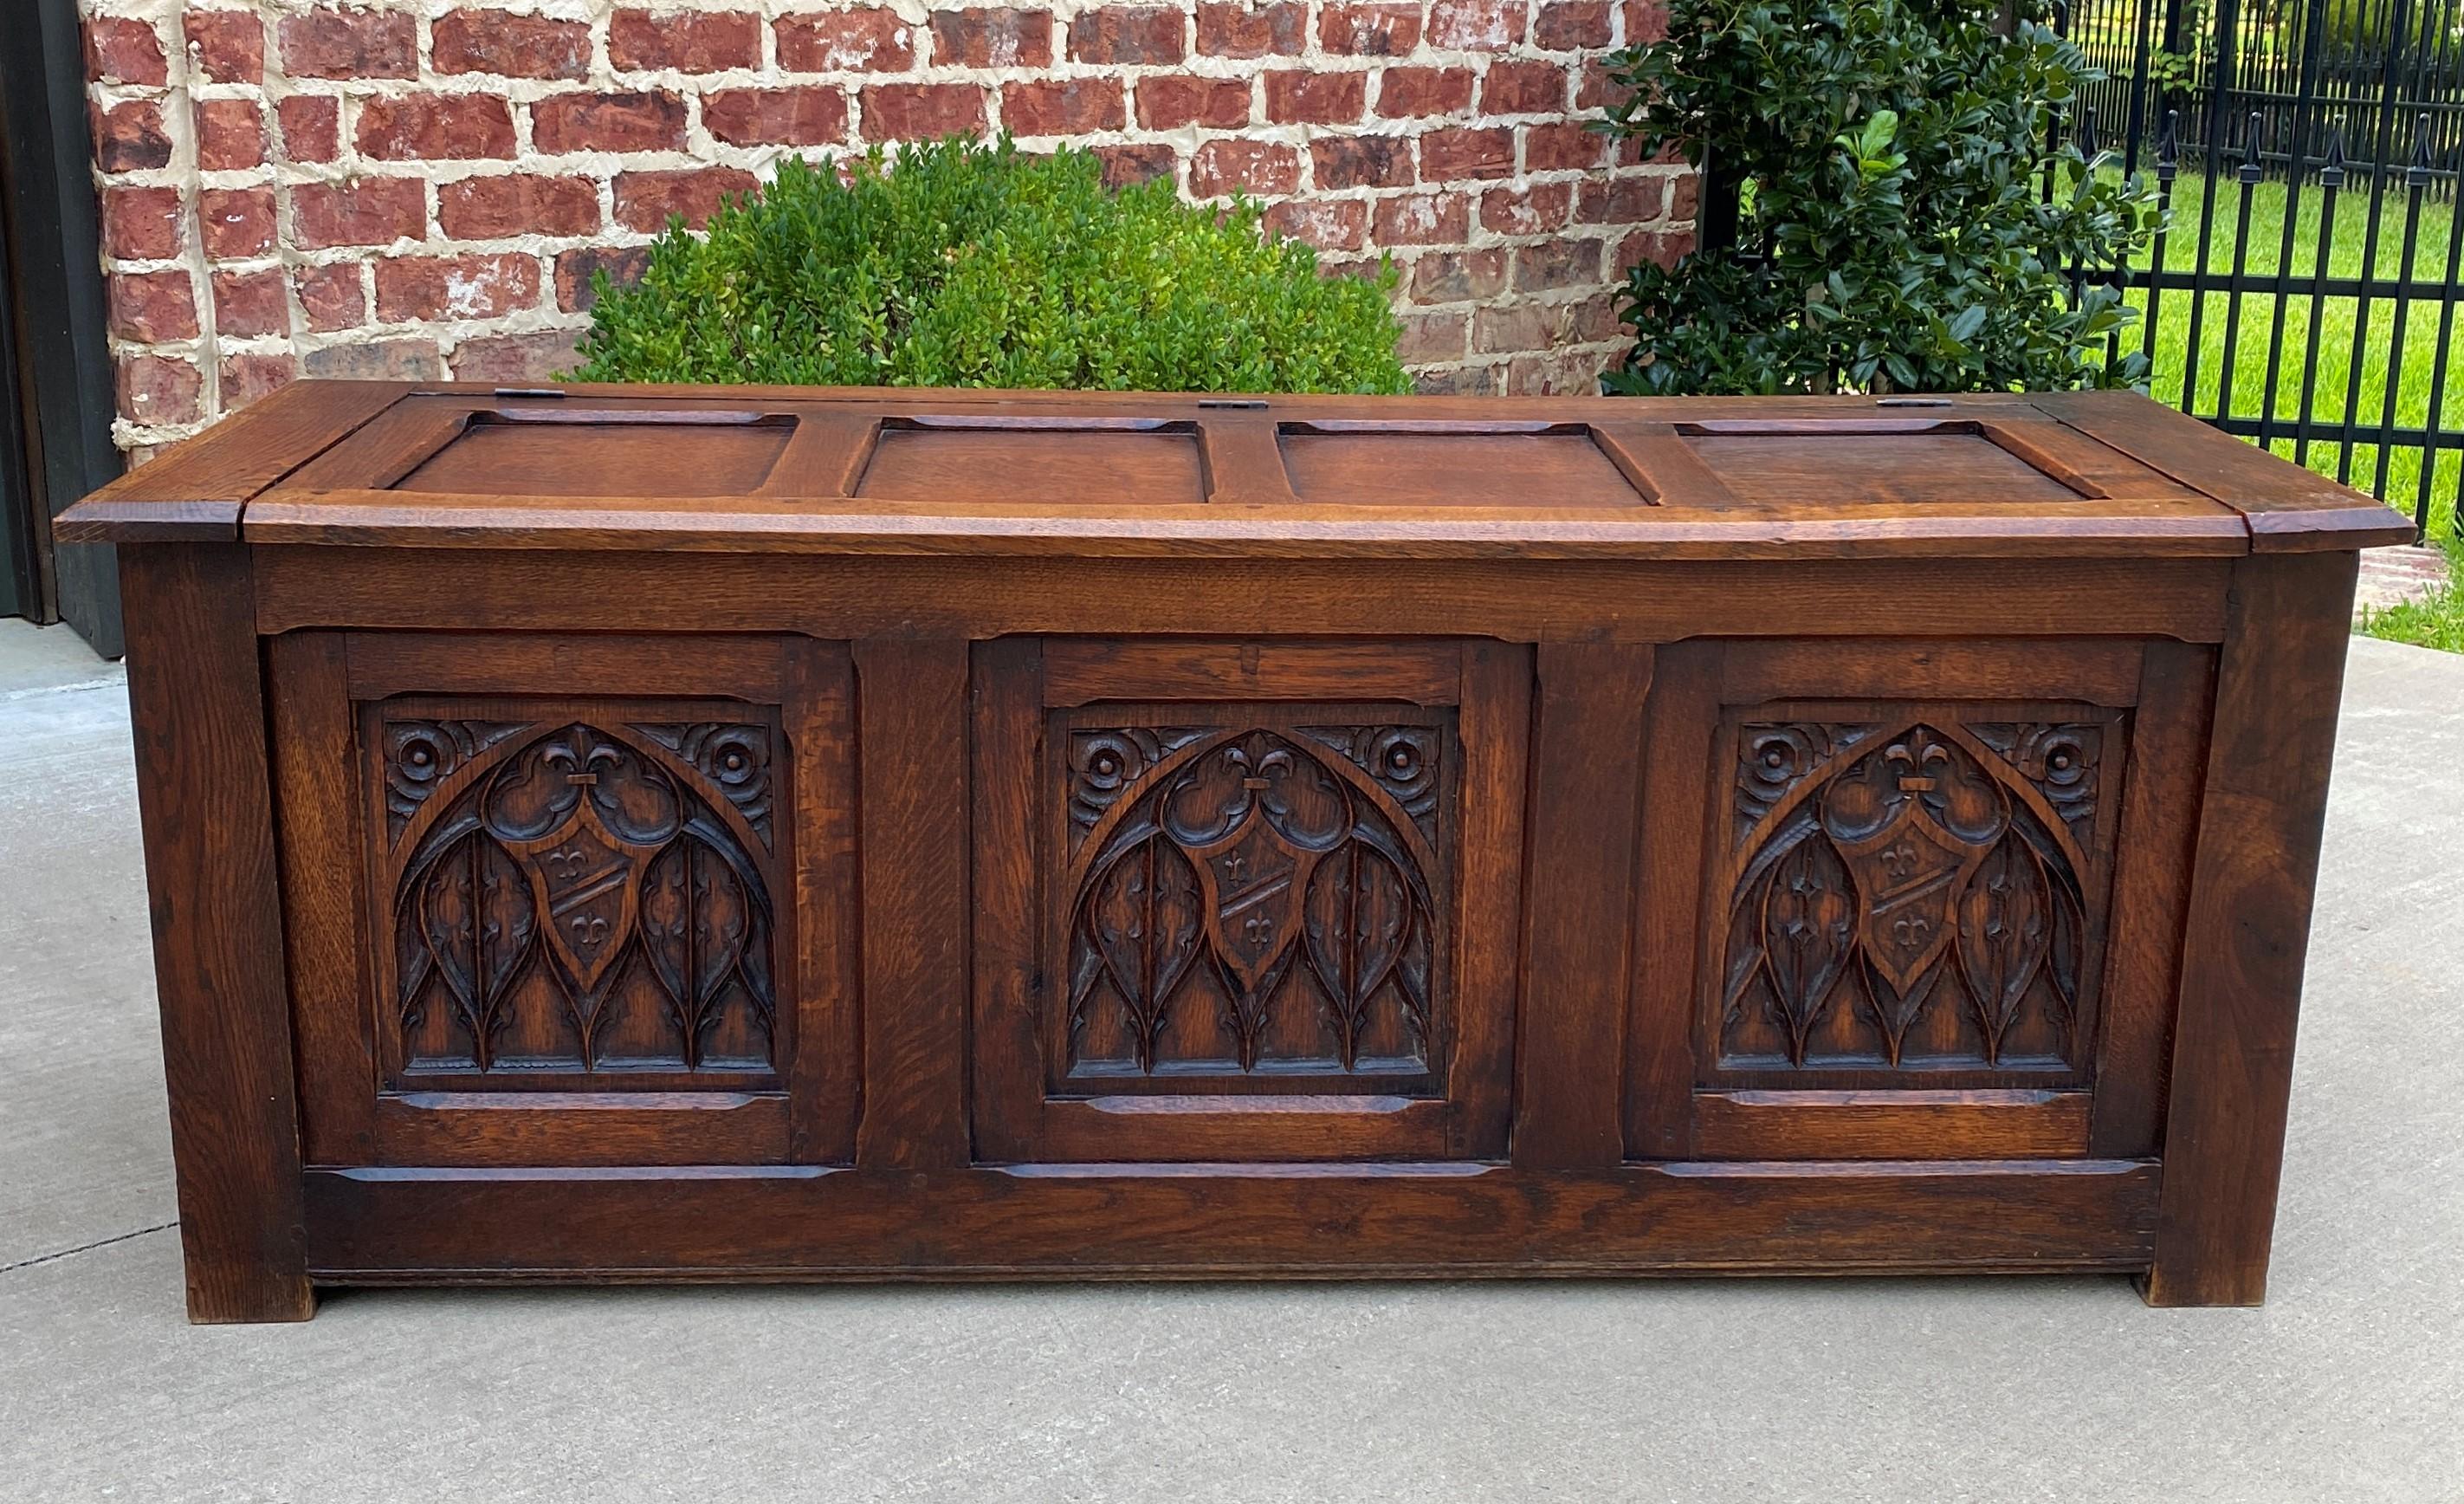 Wonderful antique French oak trunk, blanket box, storage chest, or coffee table

Carved heraldic shields with Gothic tracery and rosette accents

Use for storage of blankets, games or linens~~the possibilities are endless! 

Measures: 20.5